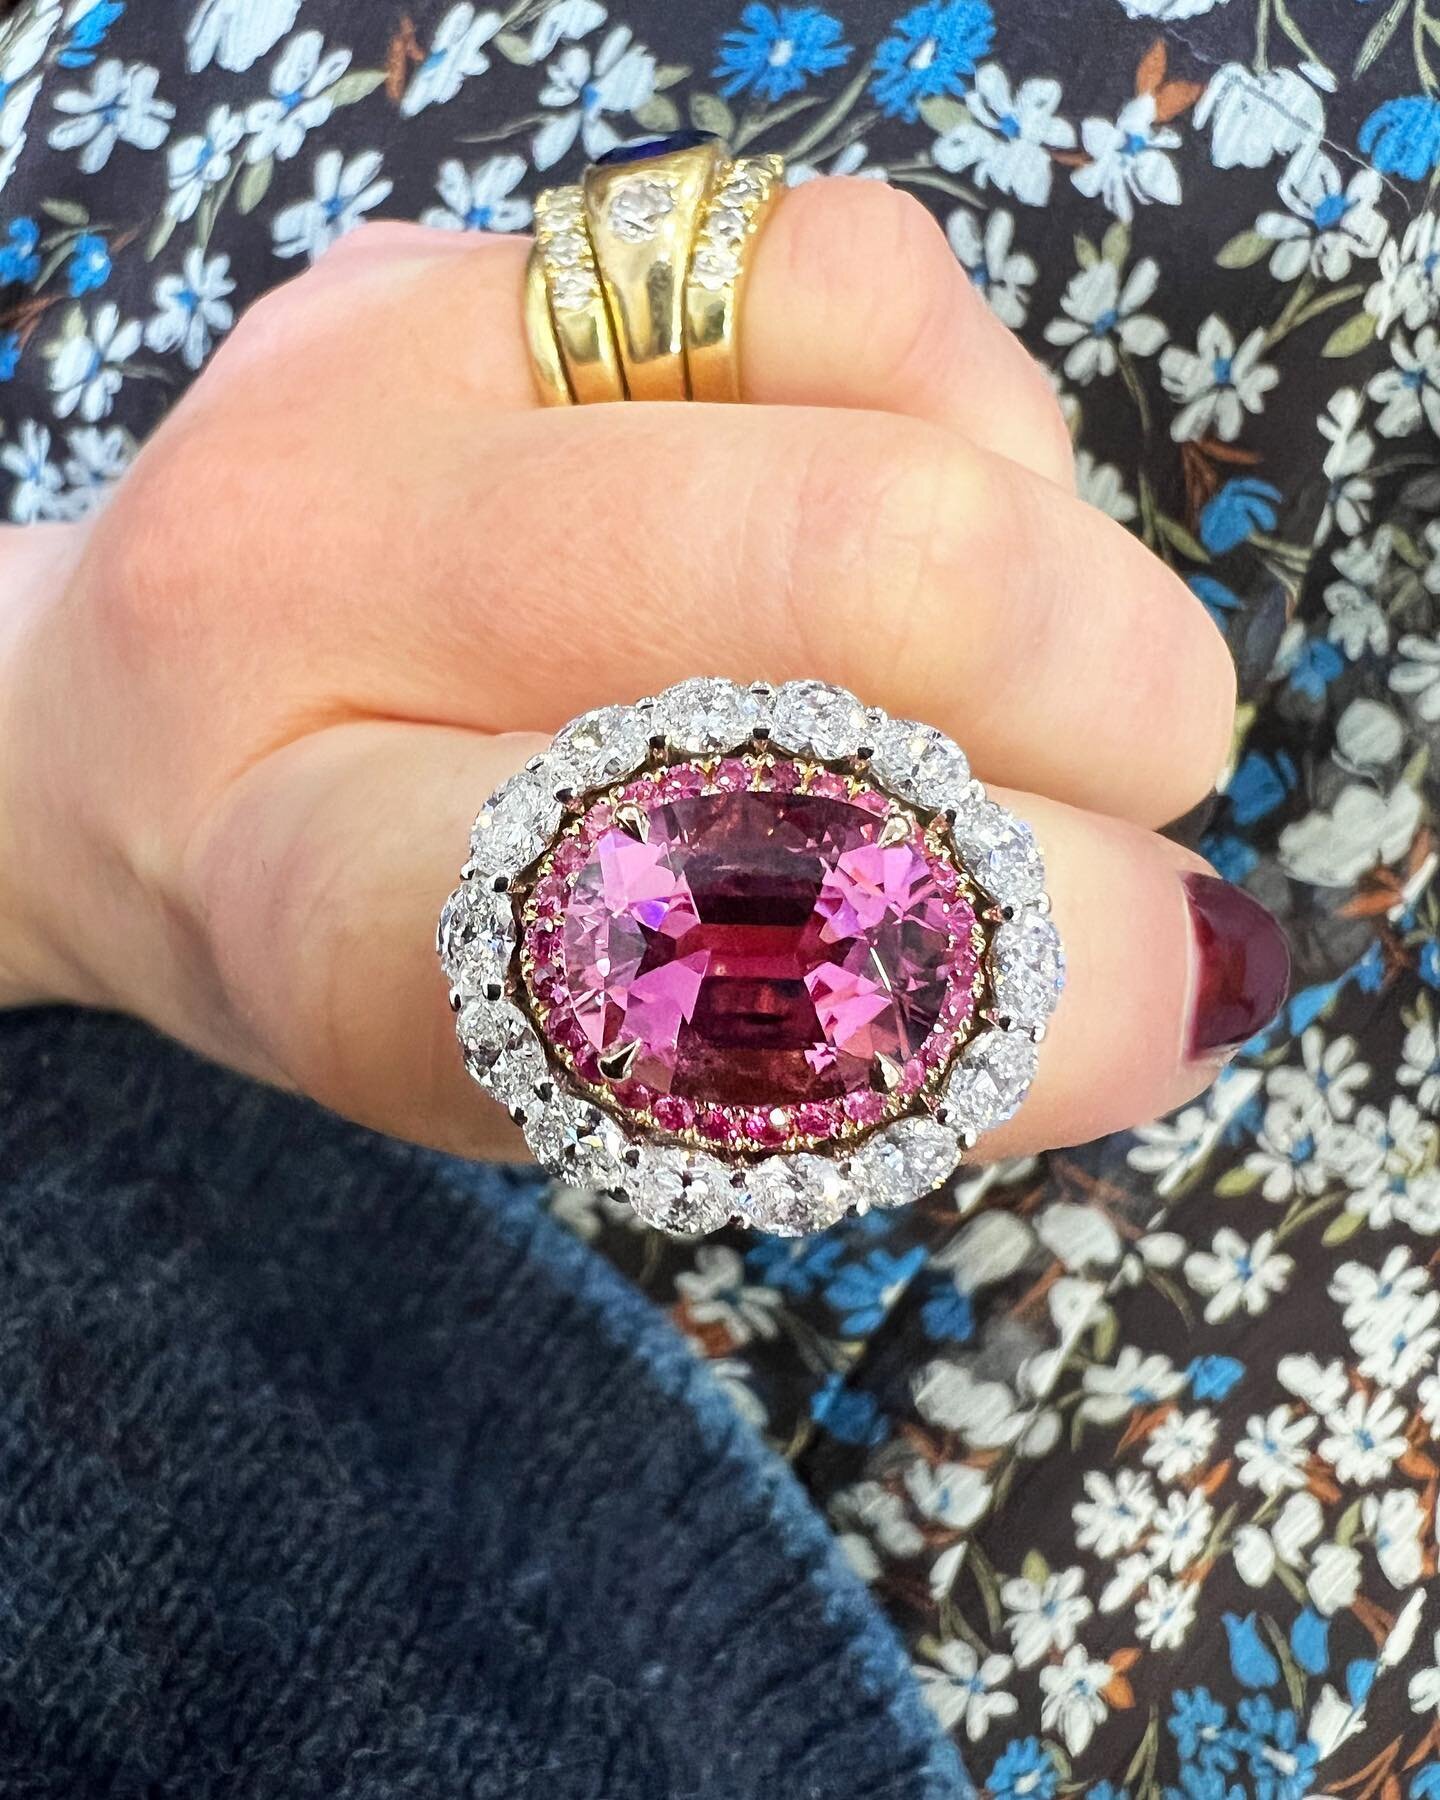 For Shannon 〰️ an 18k rose gold and platinum halo cocktail ring. Set with a central pink Mozambique oval cut Tourmaline, a halo of round pink sapphires and 15 oval cut diamonds. A true showstopper, in every sense of the word ✨

#emmaclarksonwebb #jew